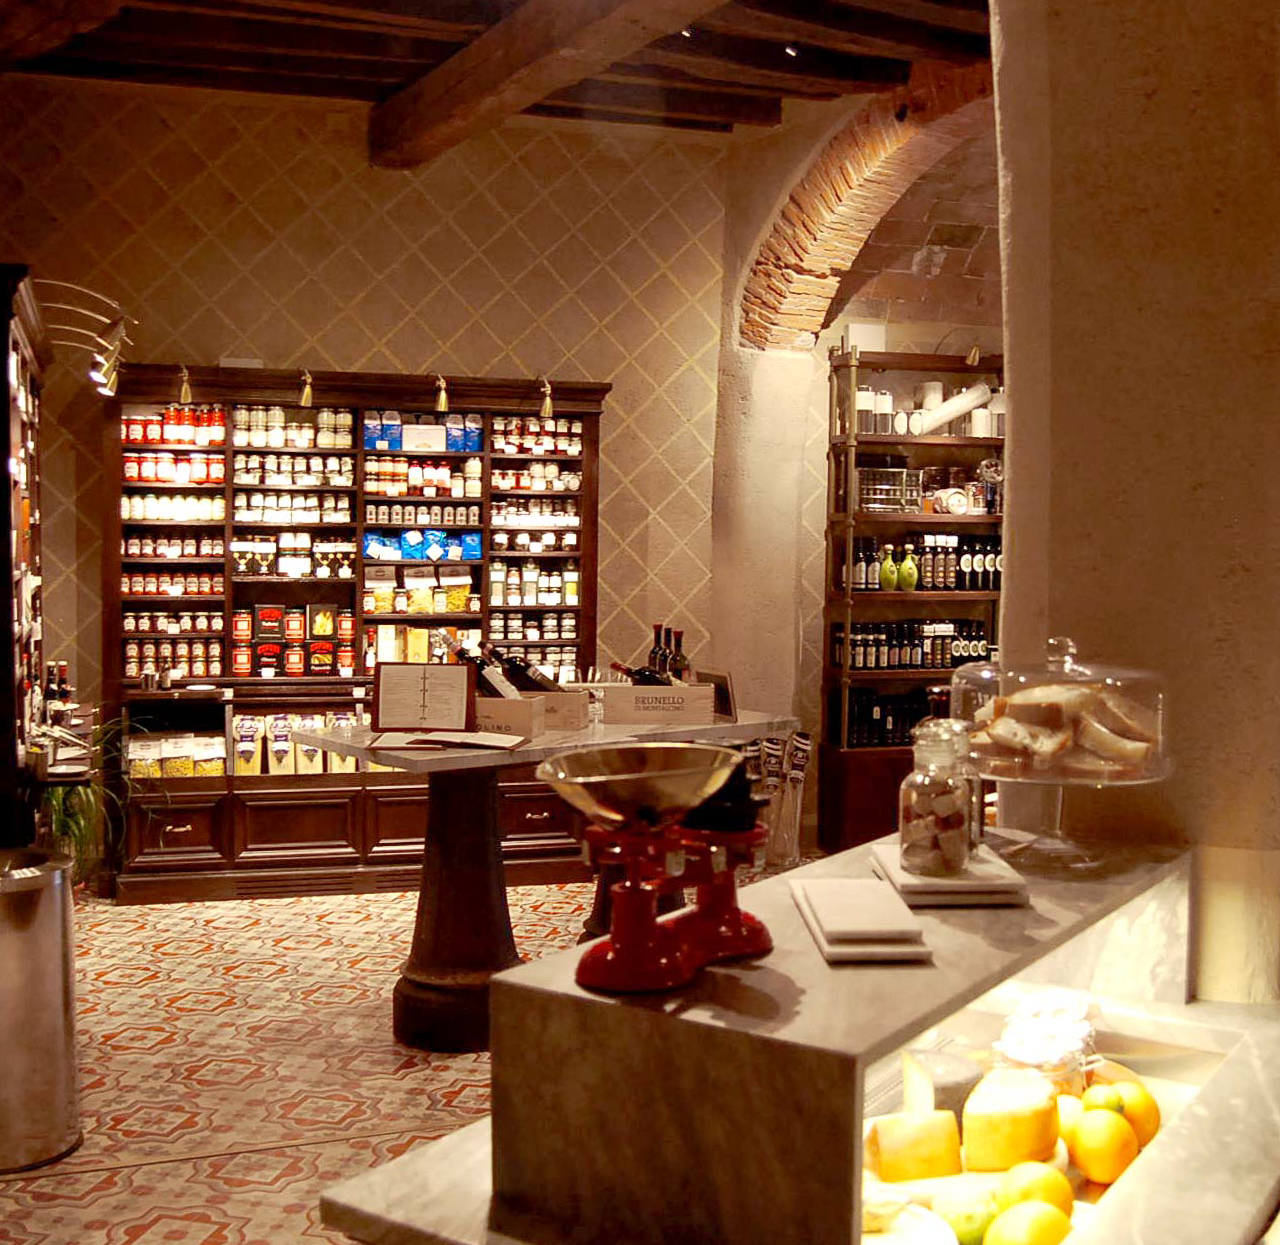 one of the images of Cucina Torcicoda work